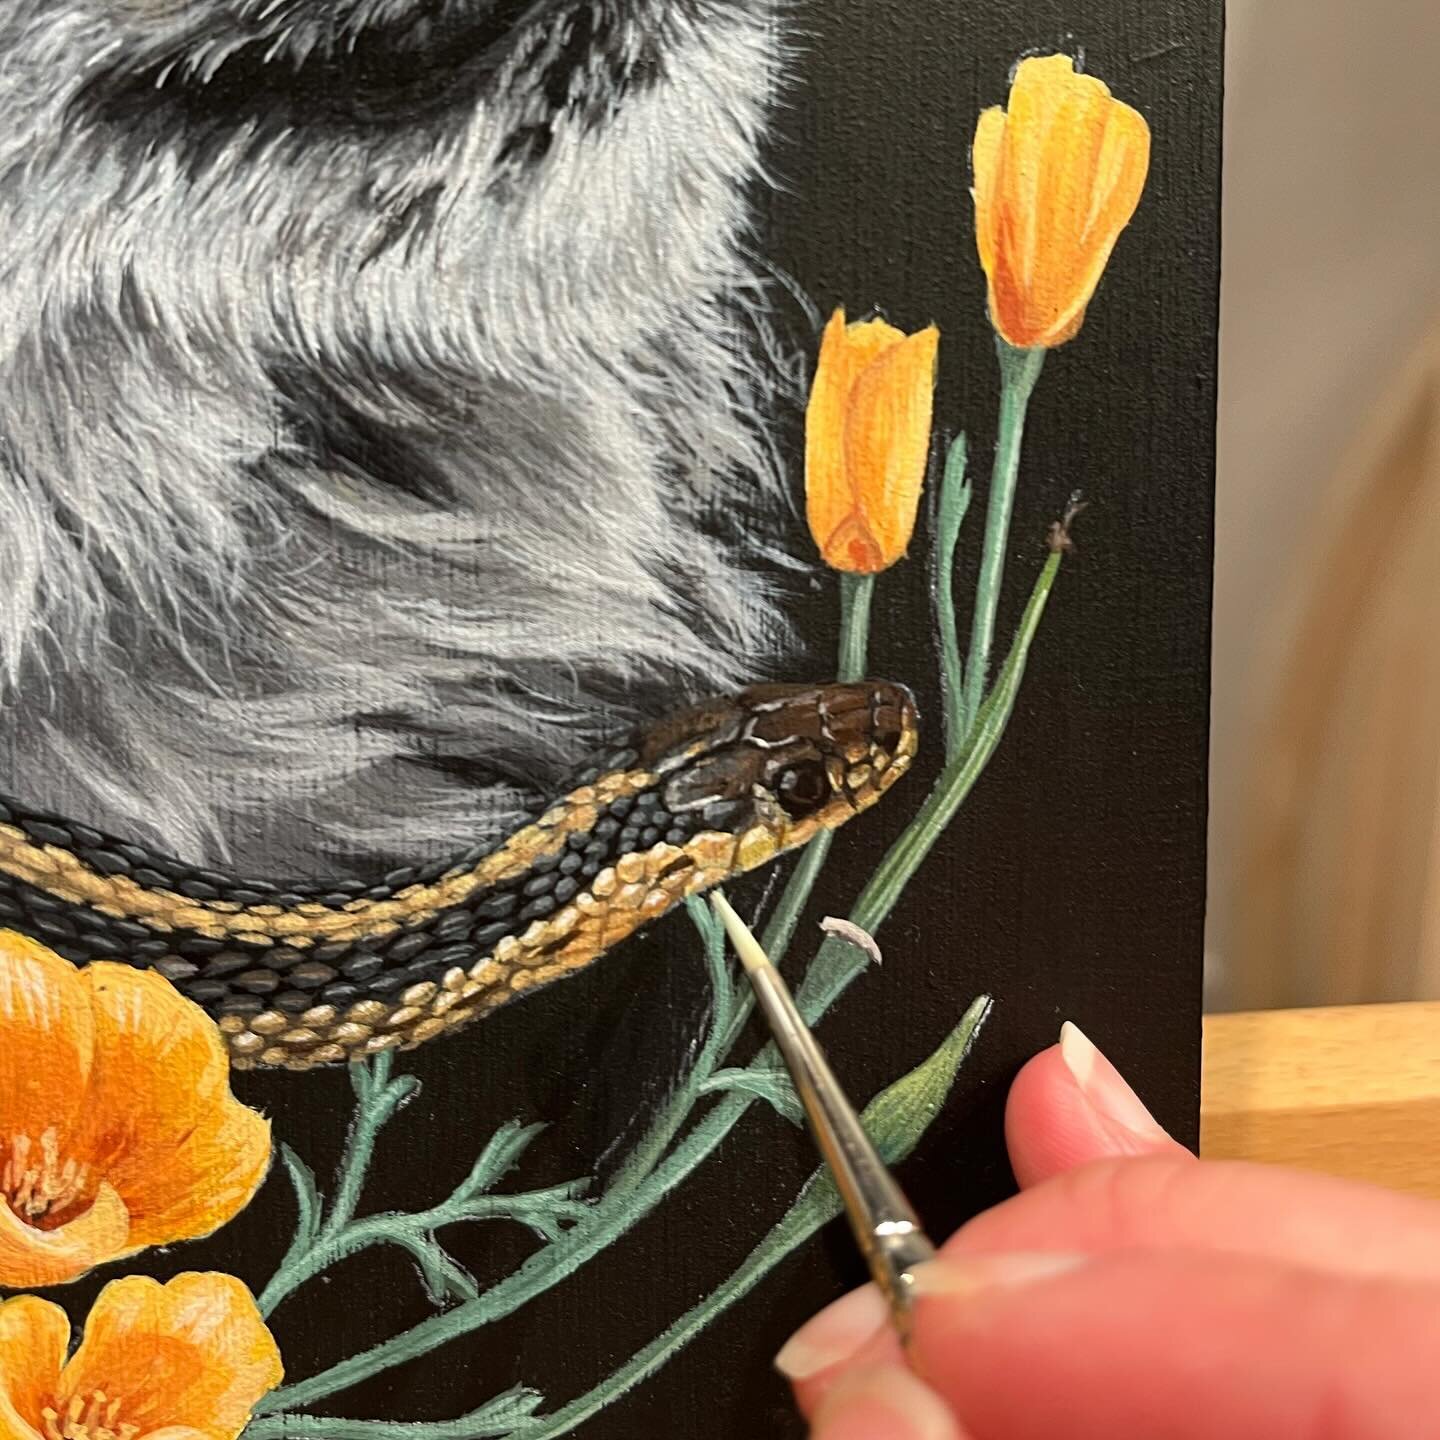 A little work in progress of this teeny garter snake.😍

I&rsquo;ve gotten some really good news in the past few days, and I can&rsquo;t wait to share more soon!

#wildlifeart #wildlifeartist #snakeart #snake #gartersnake #herp #herpnwlife #oregonart